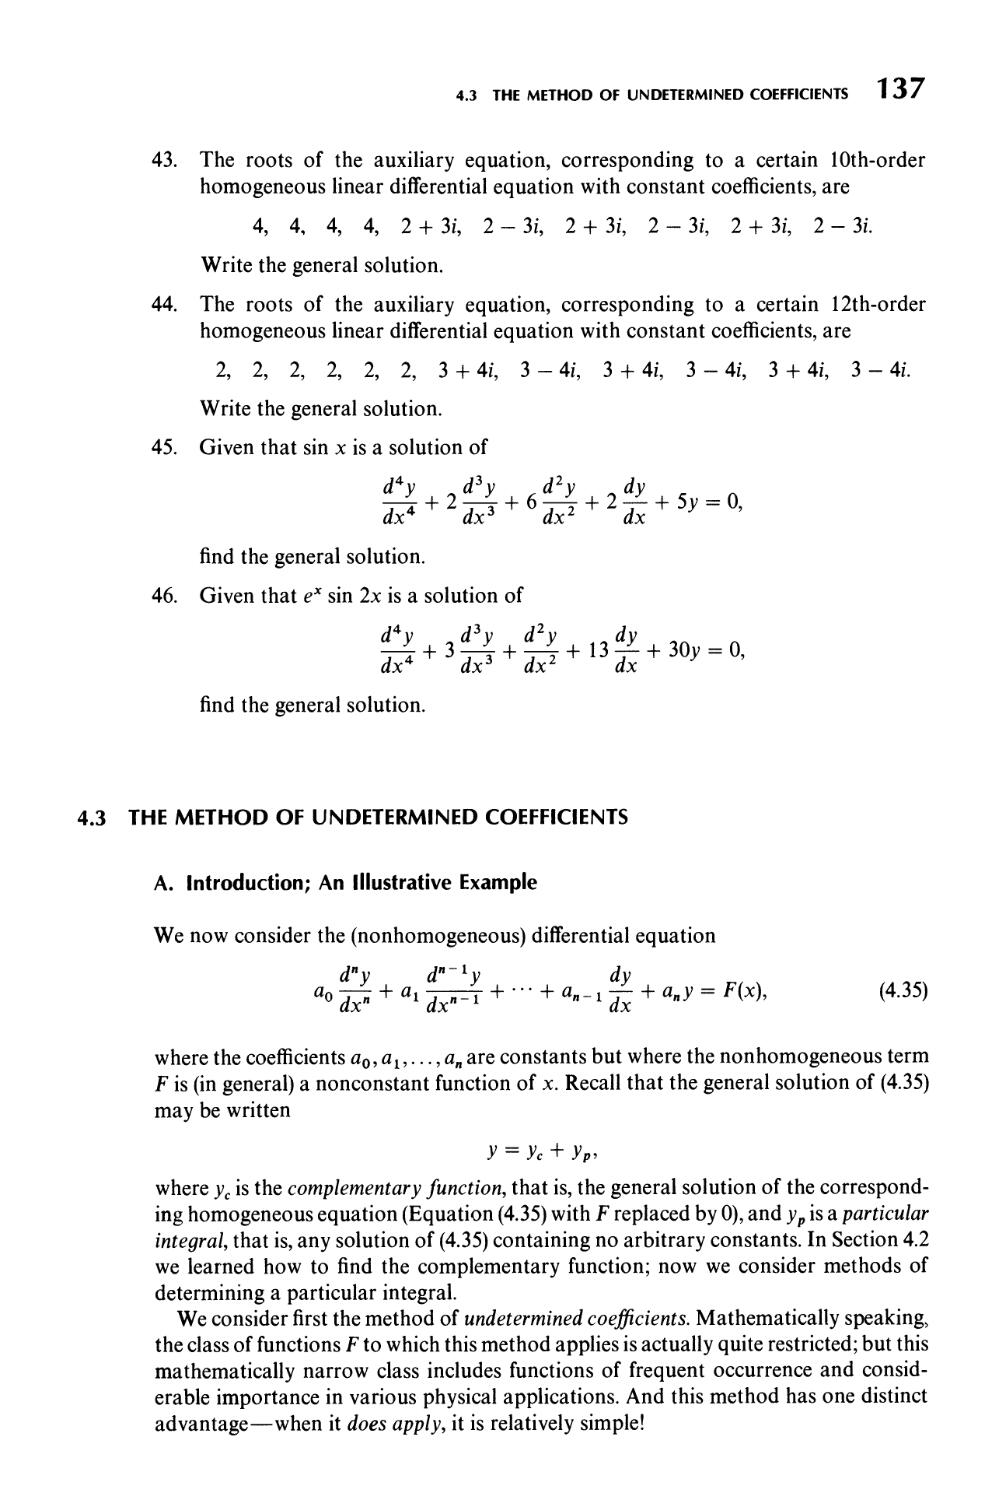 4.3  The Method of Undetermined Coefficients